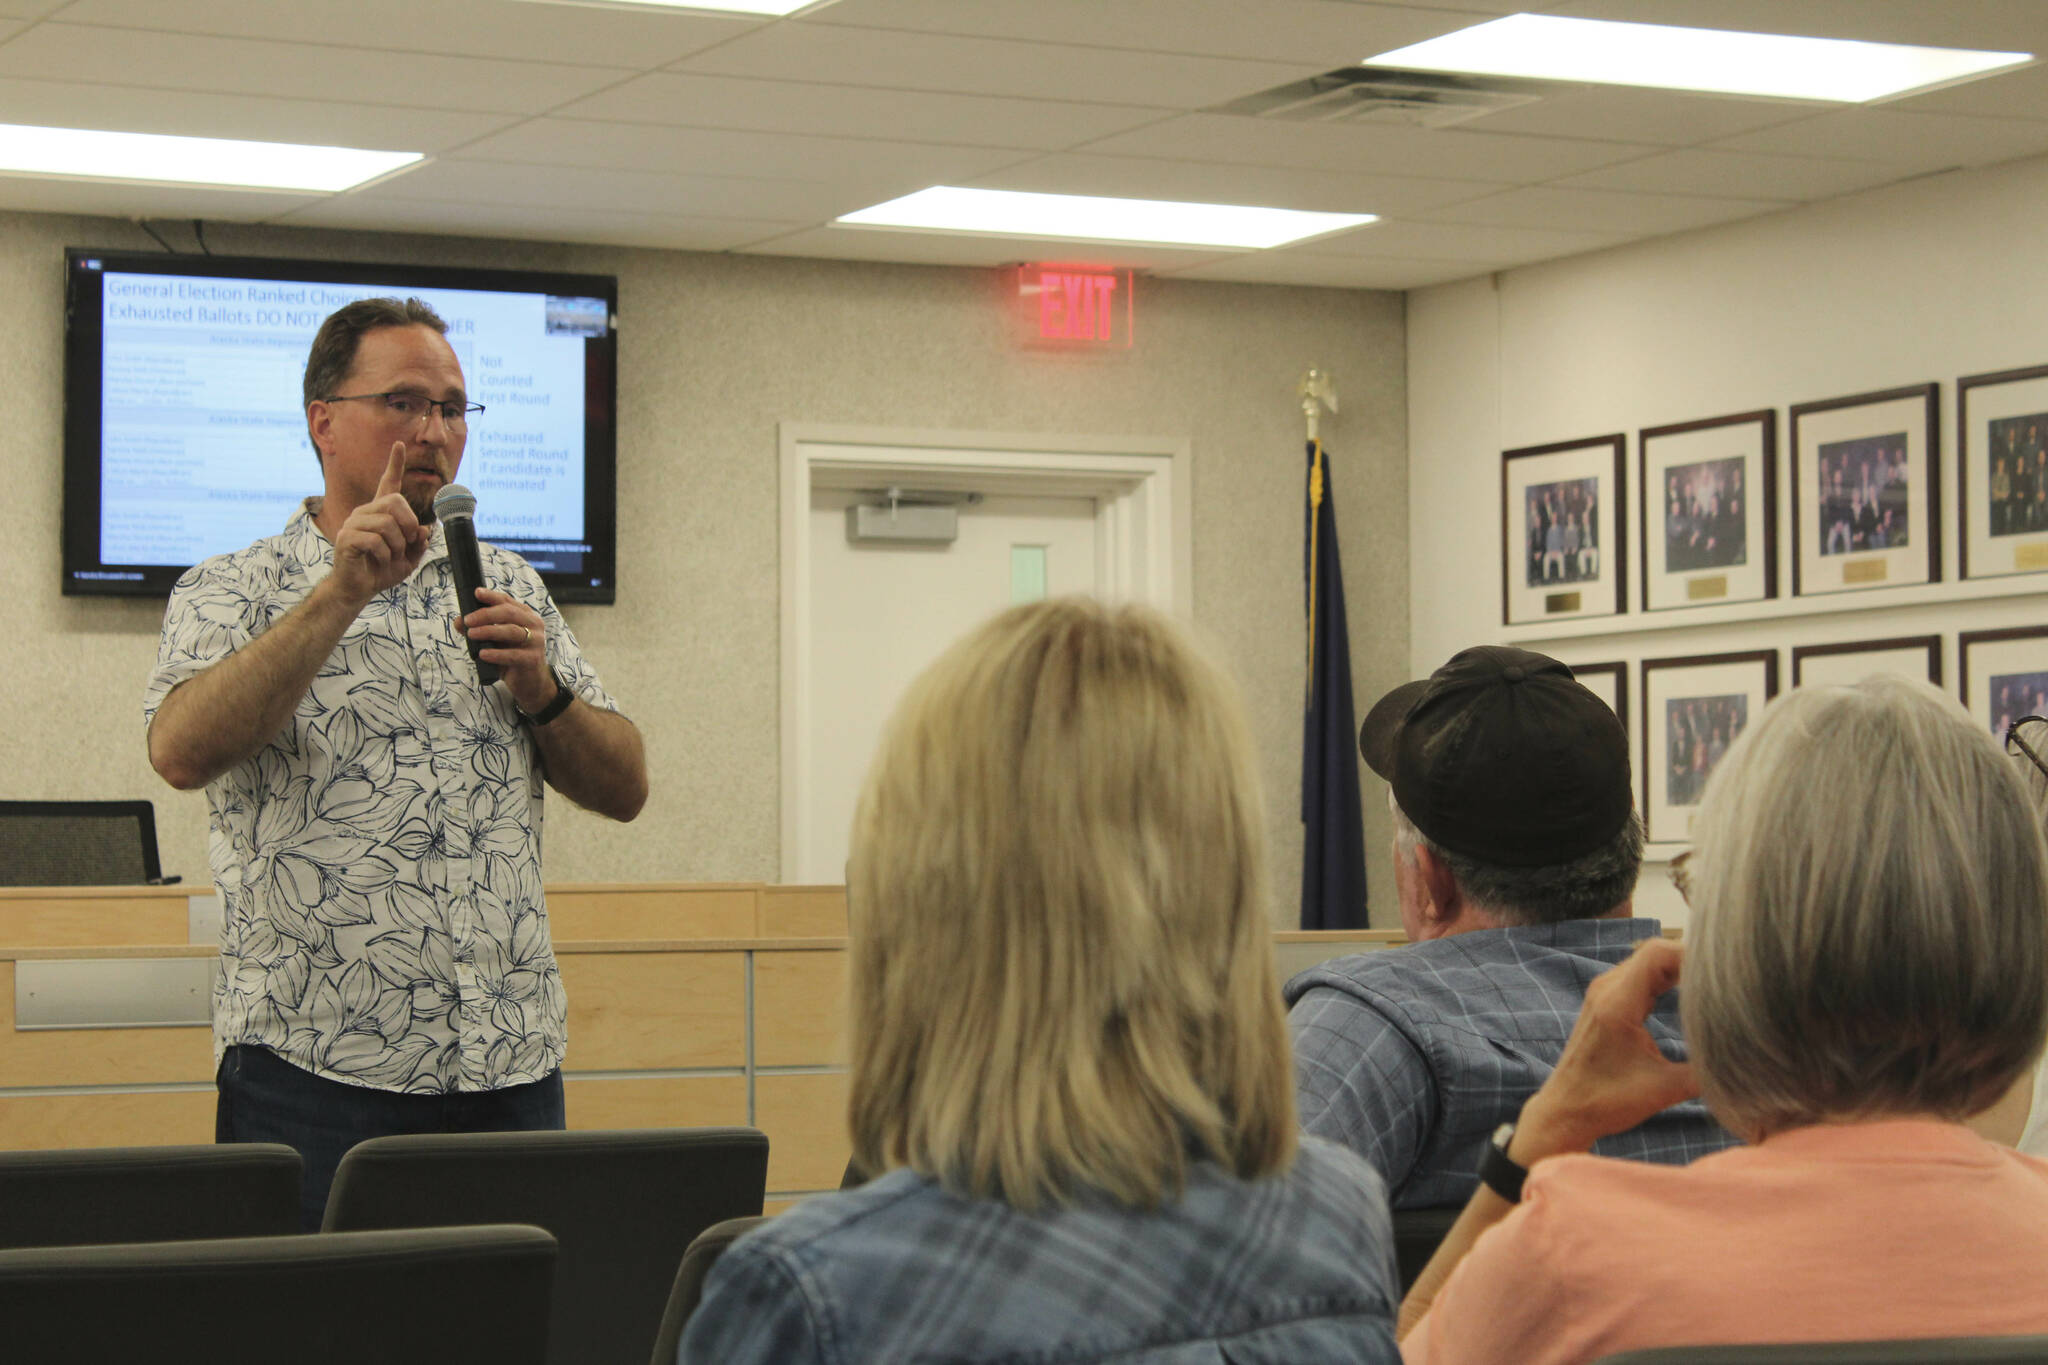 Rep. Ben Carpenter, R-Nikiski, leads an informational town hall about ranked choice voting inside the Betty J. Glick Assembly Chambers on Thursday, Aug. 4, 2022 in Soldotna, Alaska. (Ashlyn O’Hara/Peninsula Clarion)